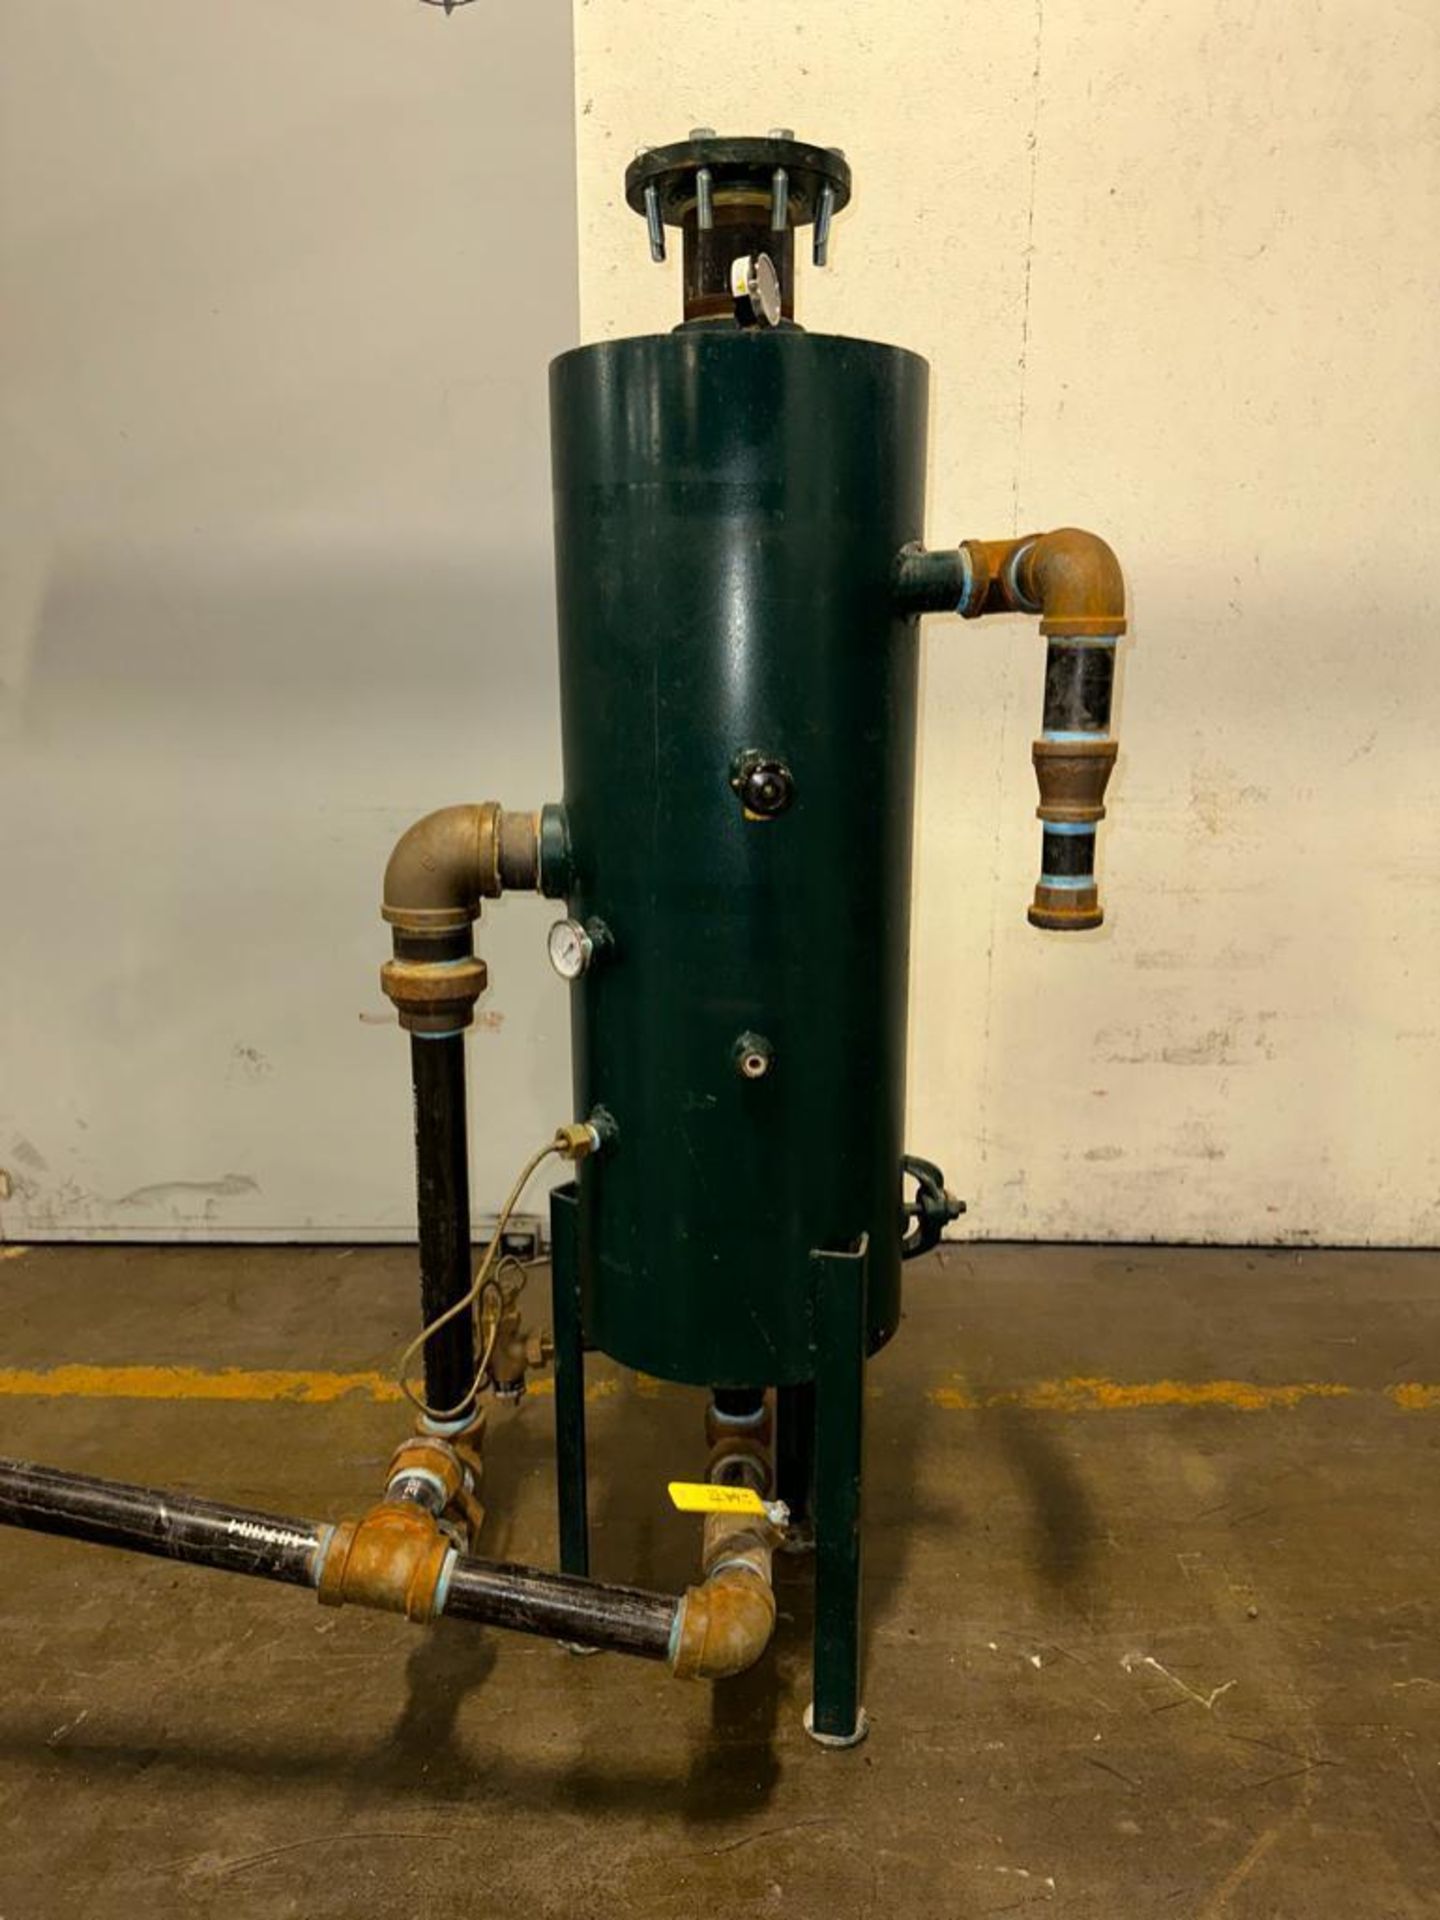 2018 Columbia 80 HP Natural Gas Boiler, S/N: 154787 - Rigging Fee: Contact HDC - Image 2 of 2